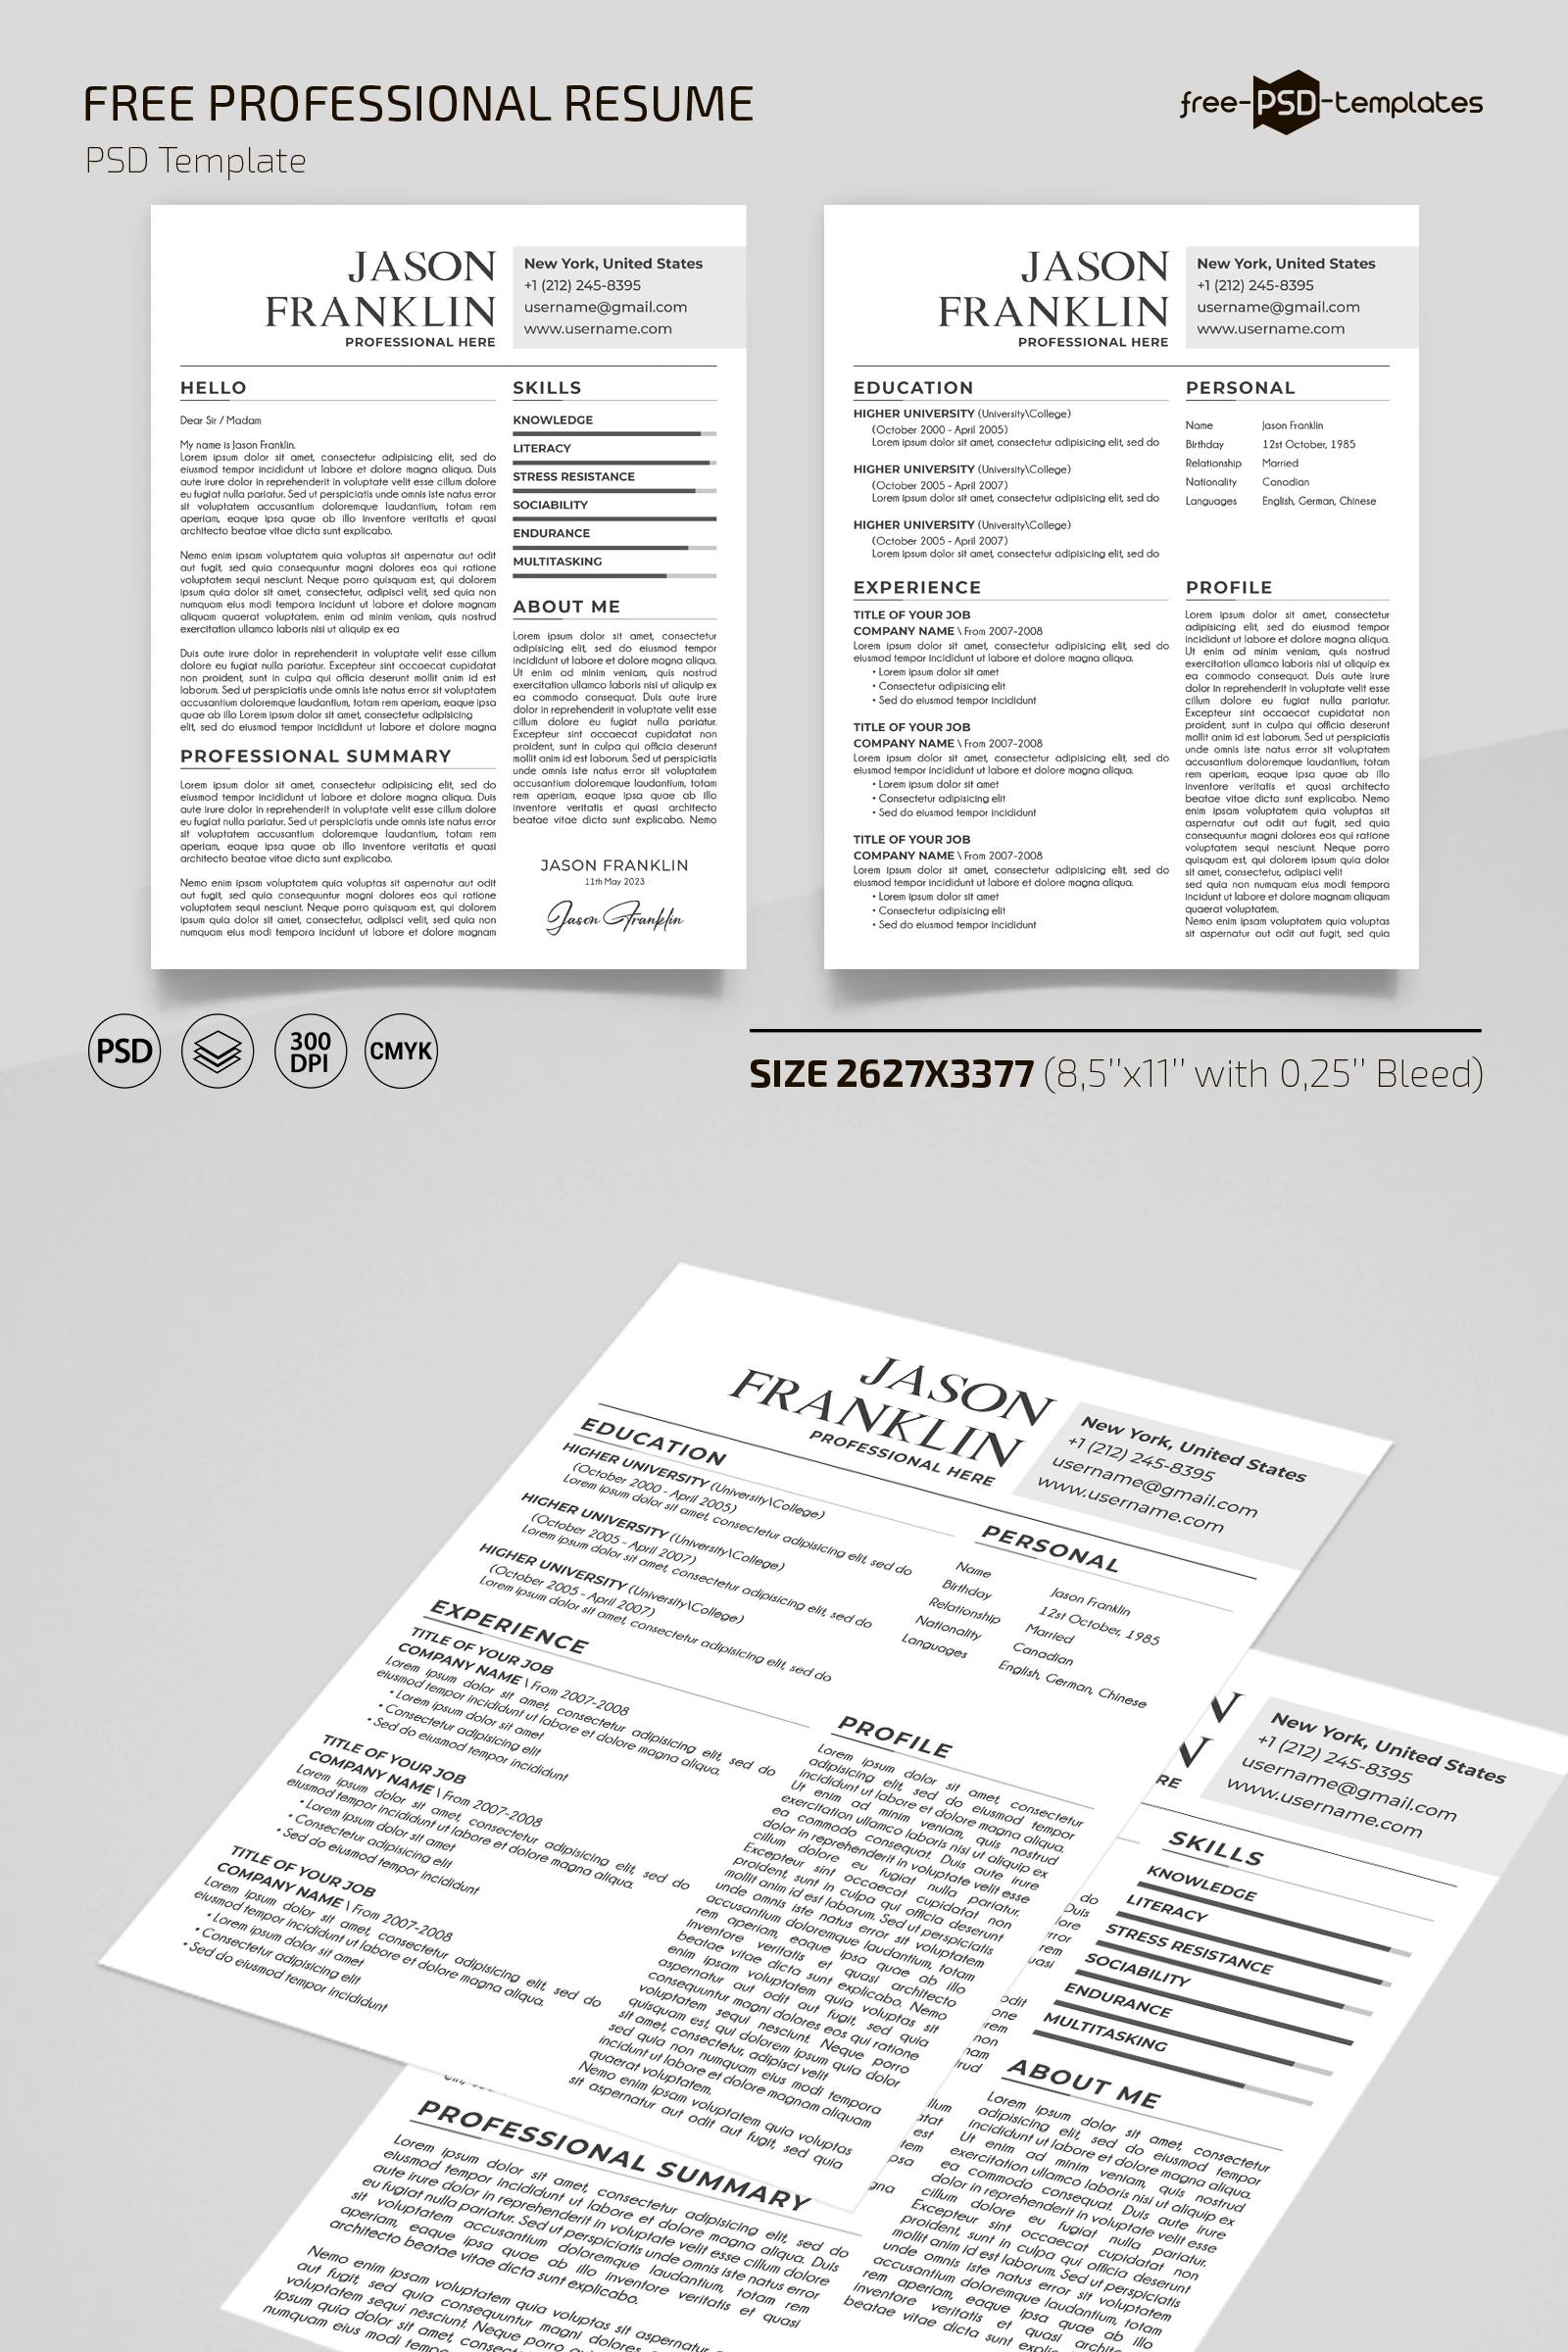 Free Swe Resume Template in PSD